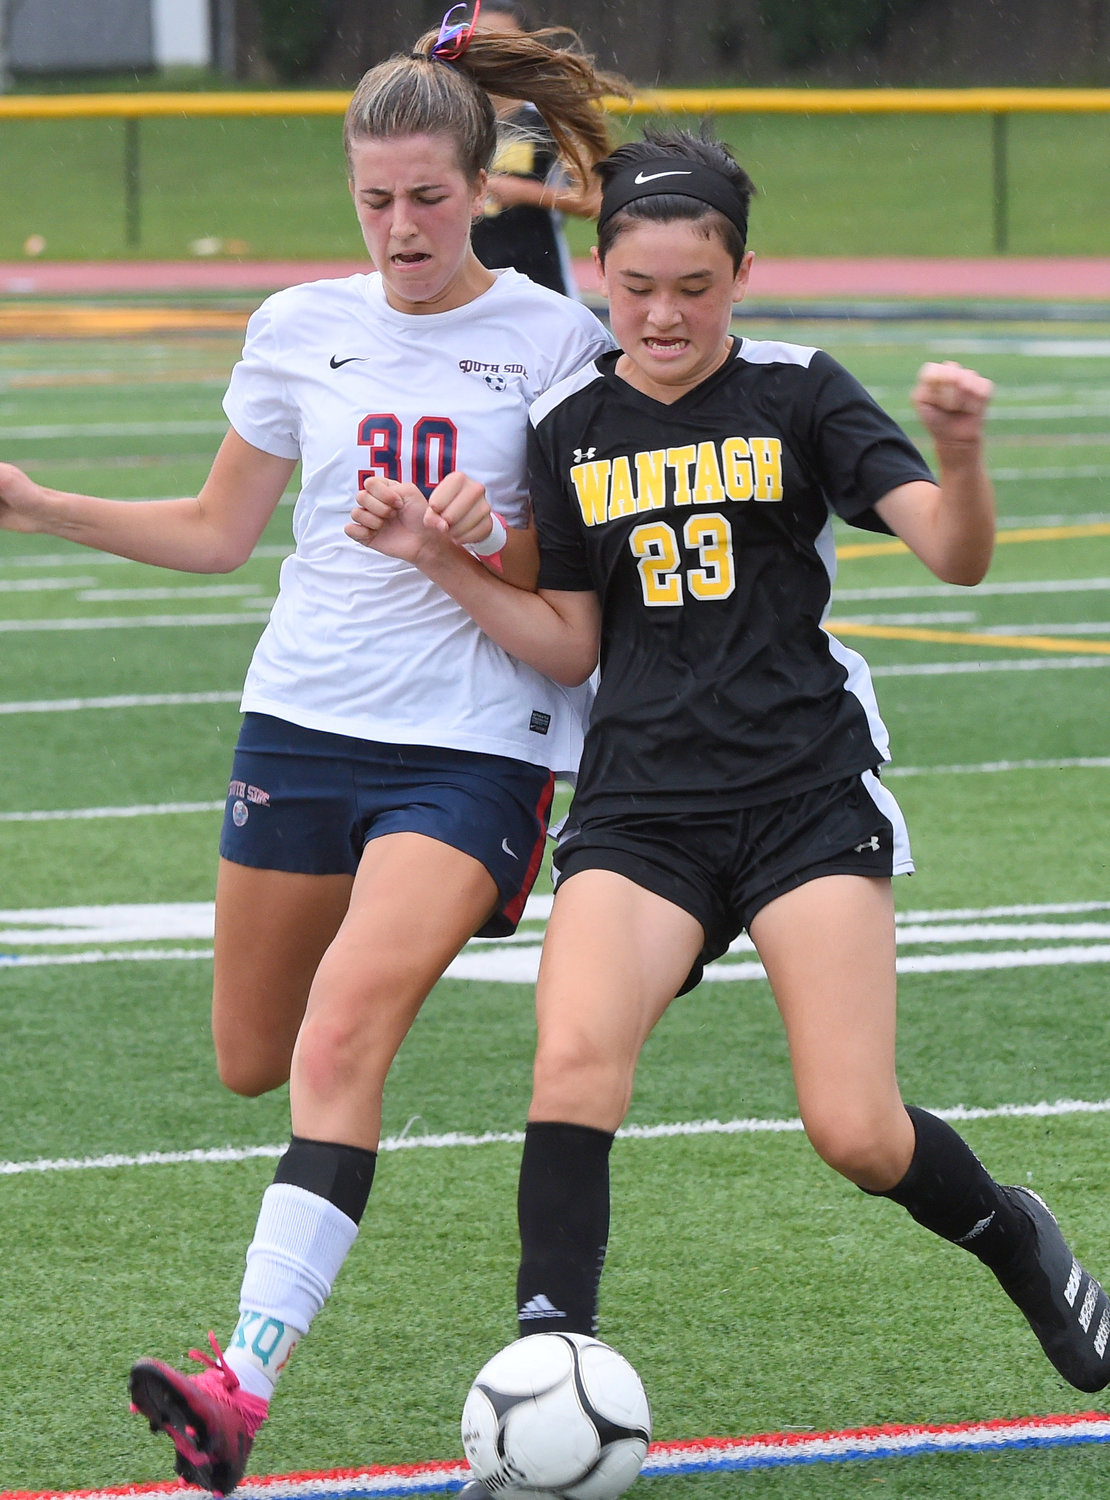 Wantagh's Kate Vezzuto, right, controlled the ball in front of South Side's Anna Pennecke during the season opener for both teams Sept. 9.